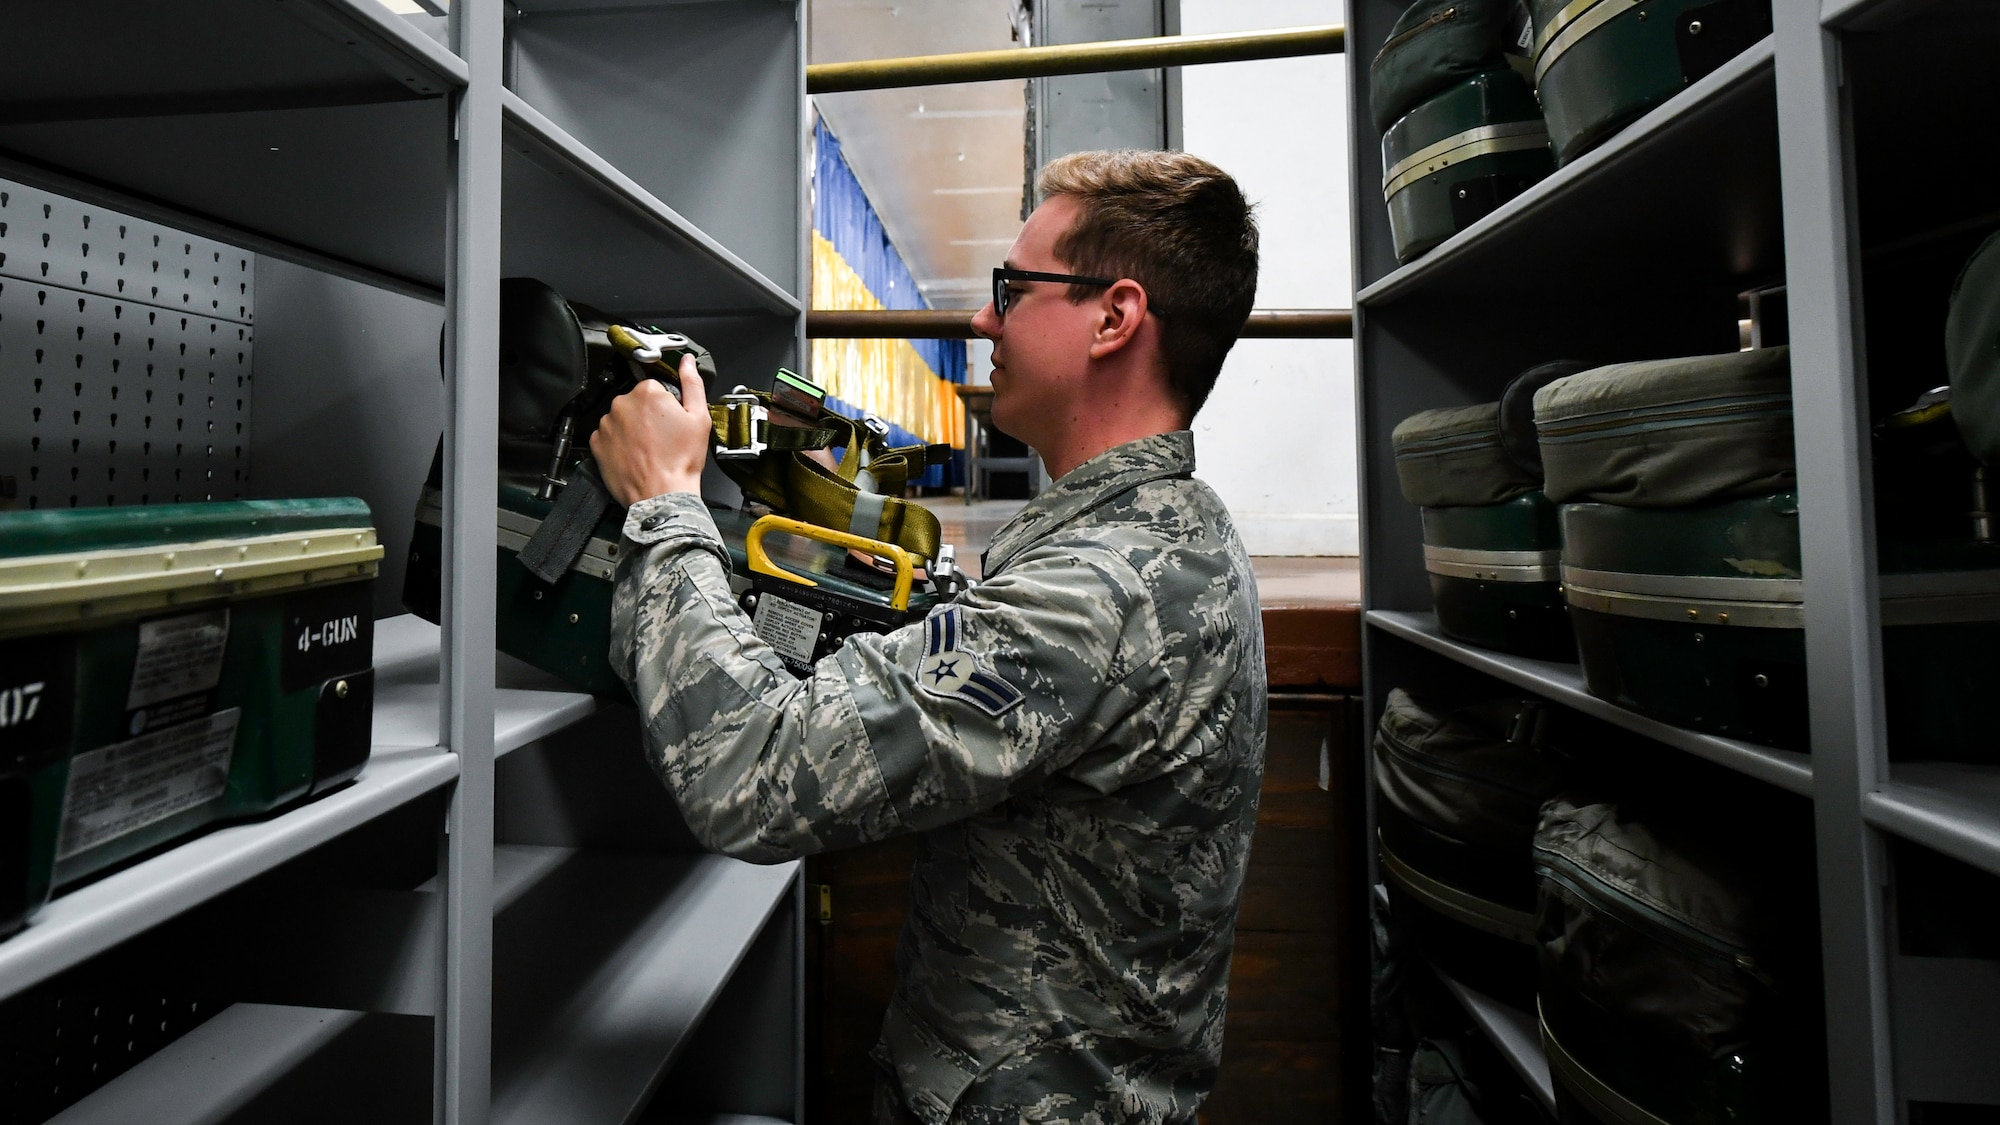 Aircrew flight equipment: The right equipment for a global mission